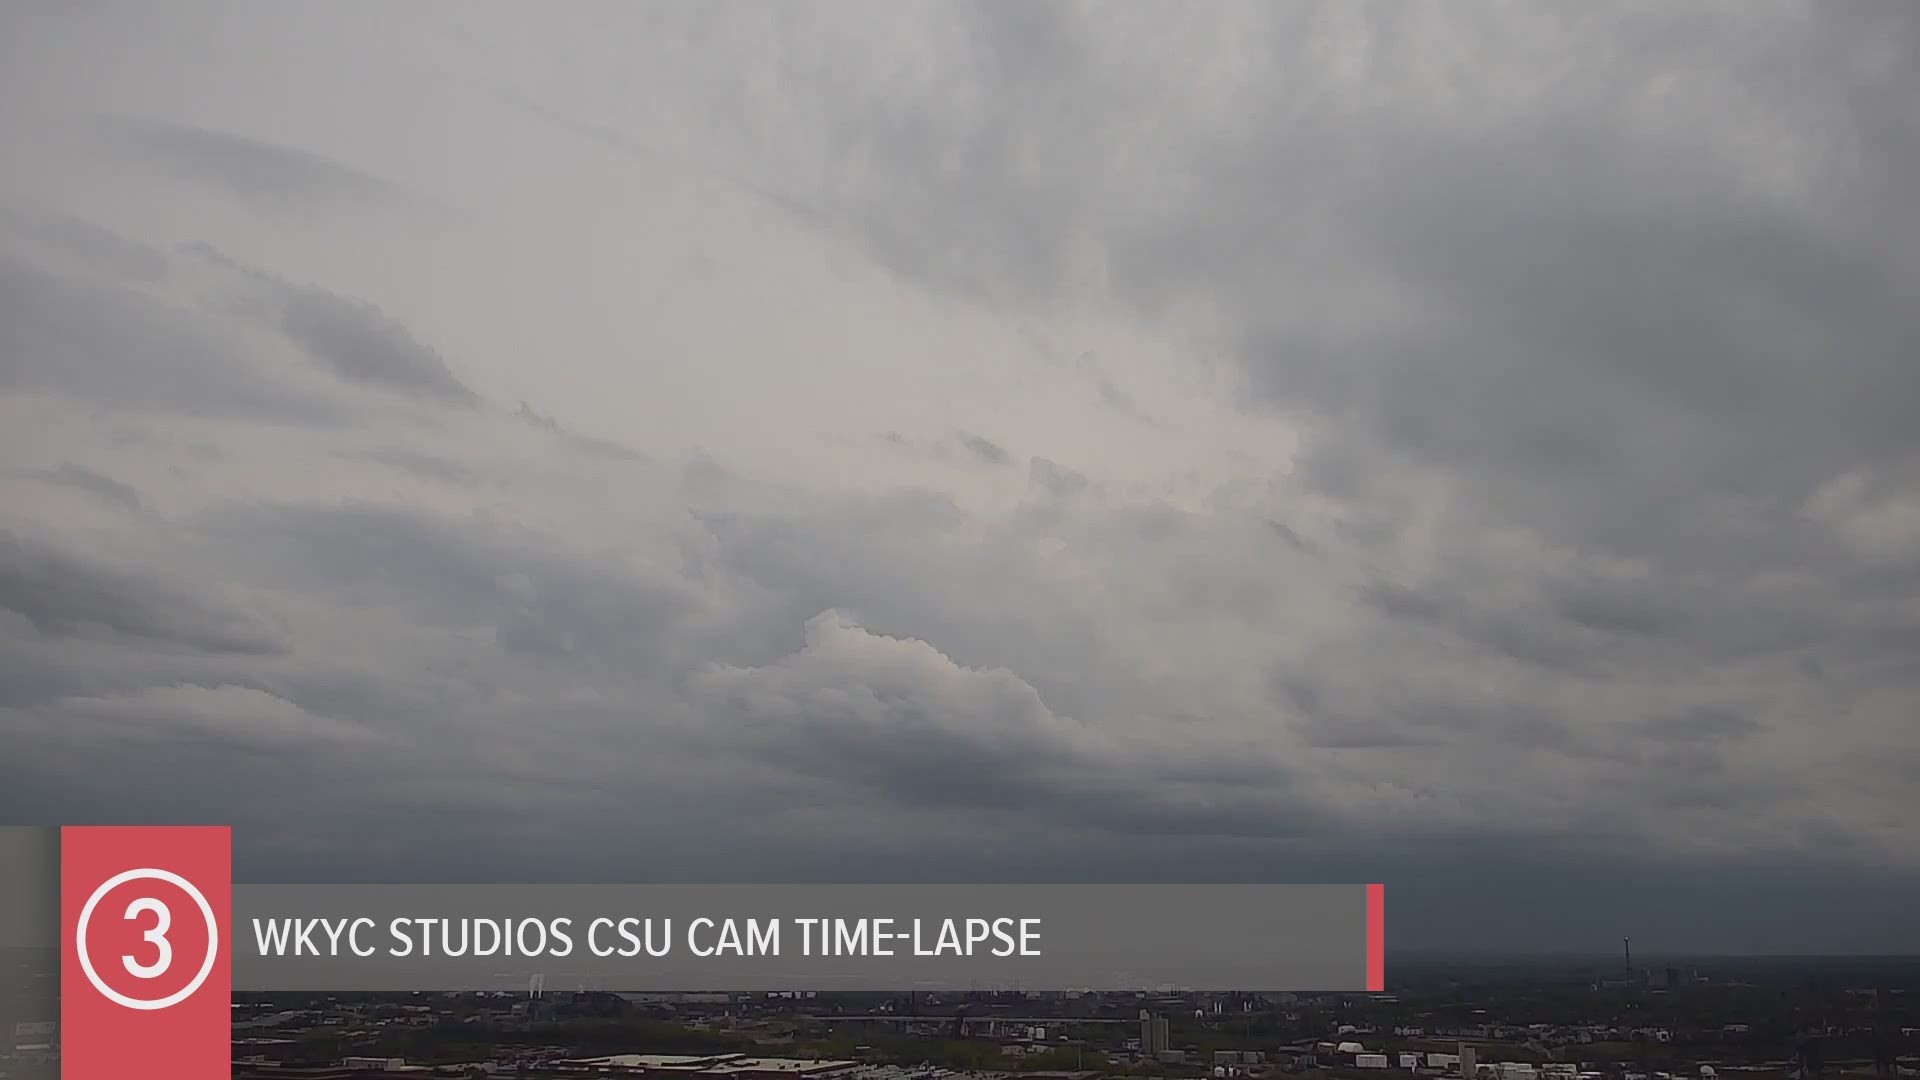 Here's Sunday evening's time-lapse of the rain/storms moving into the Cleveland earlier on. #3weather